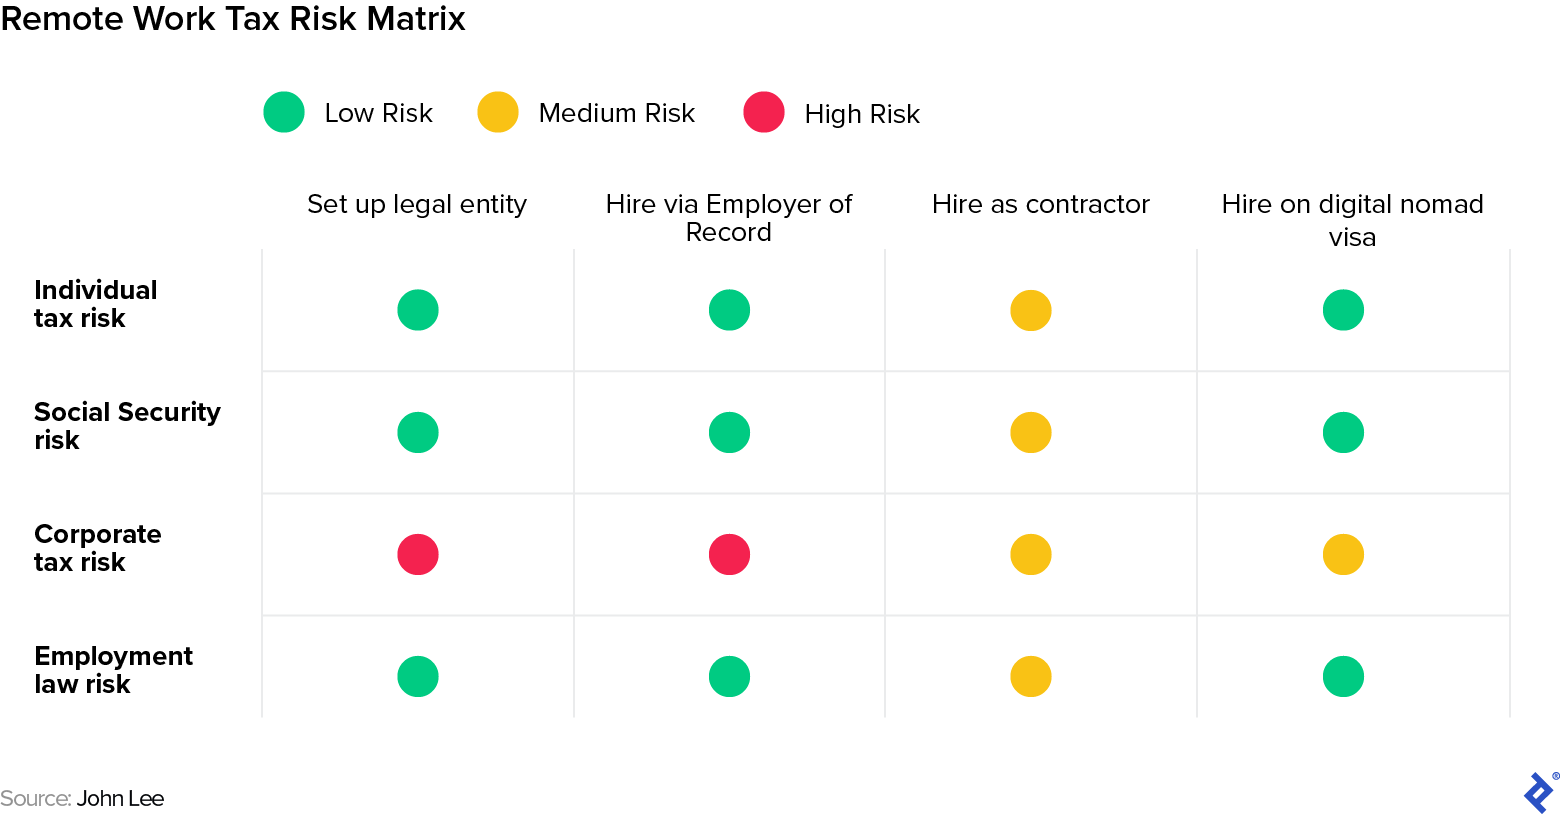 A matrix showing intersections of low, moderate, and high risk for remote work across various tax and legal scenarios.